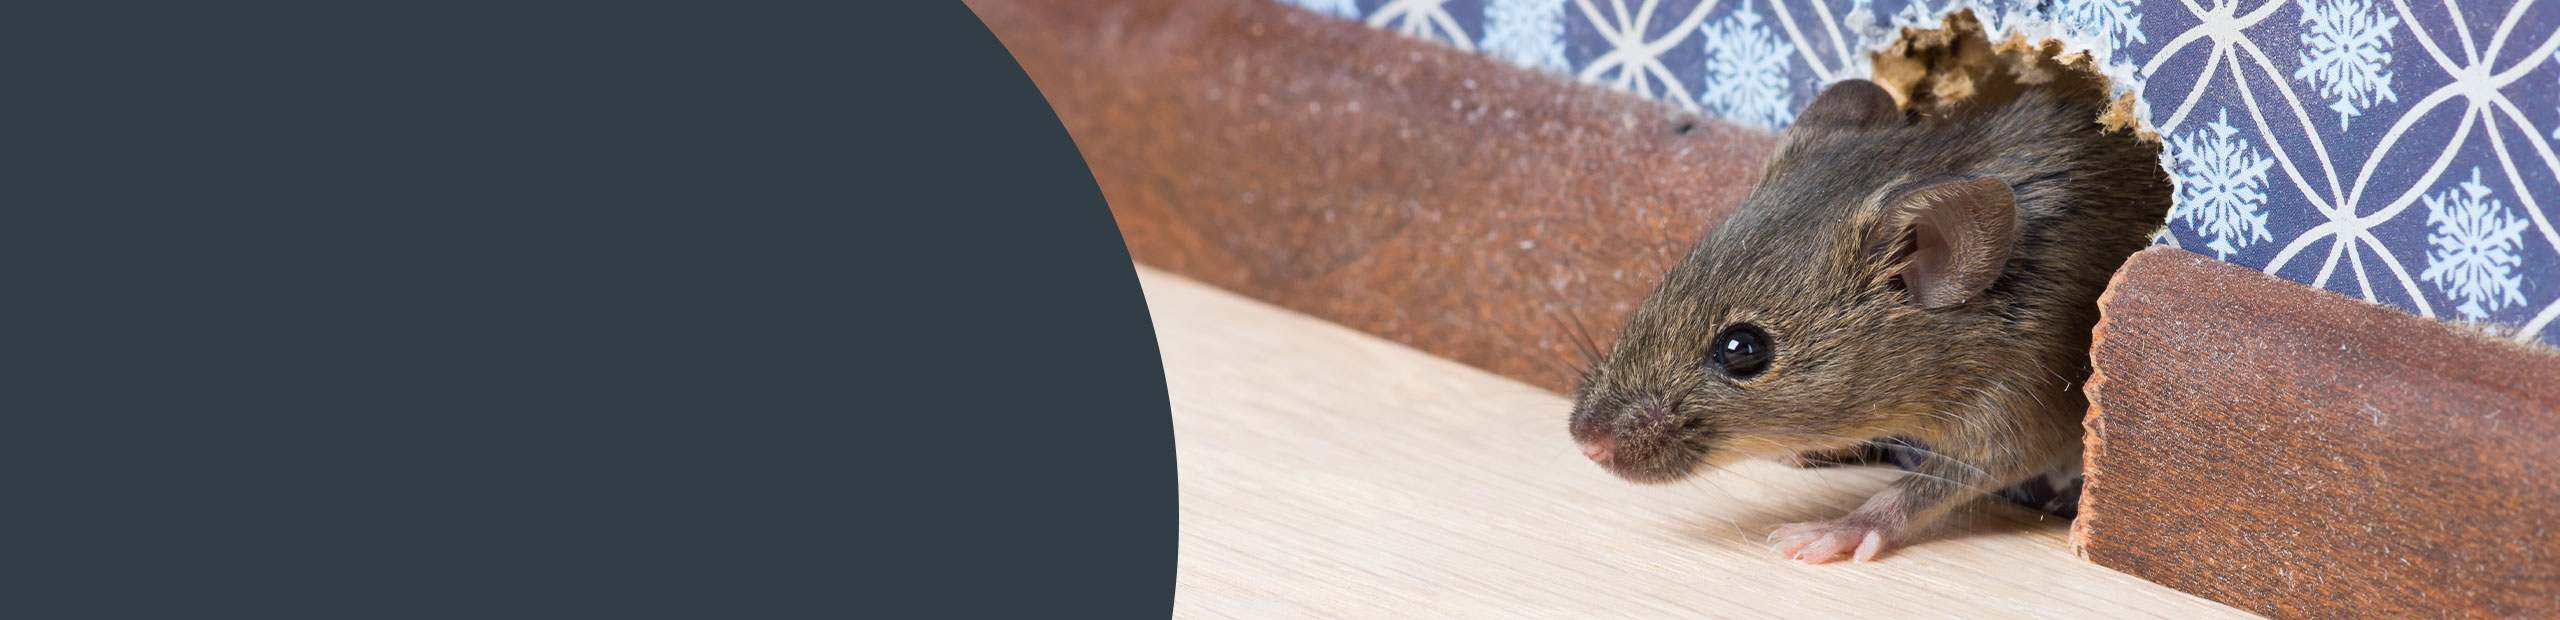 Rodent Removal Services - Camden